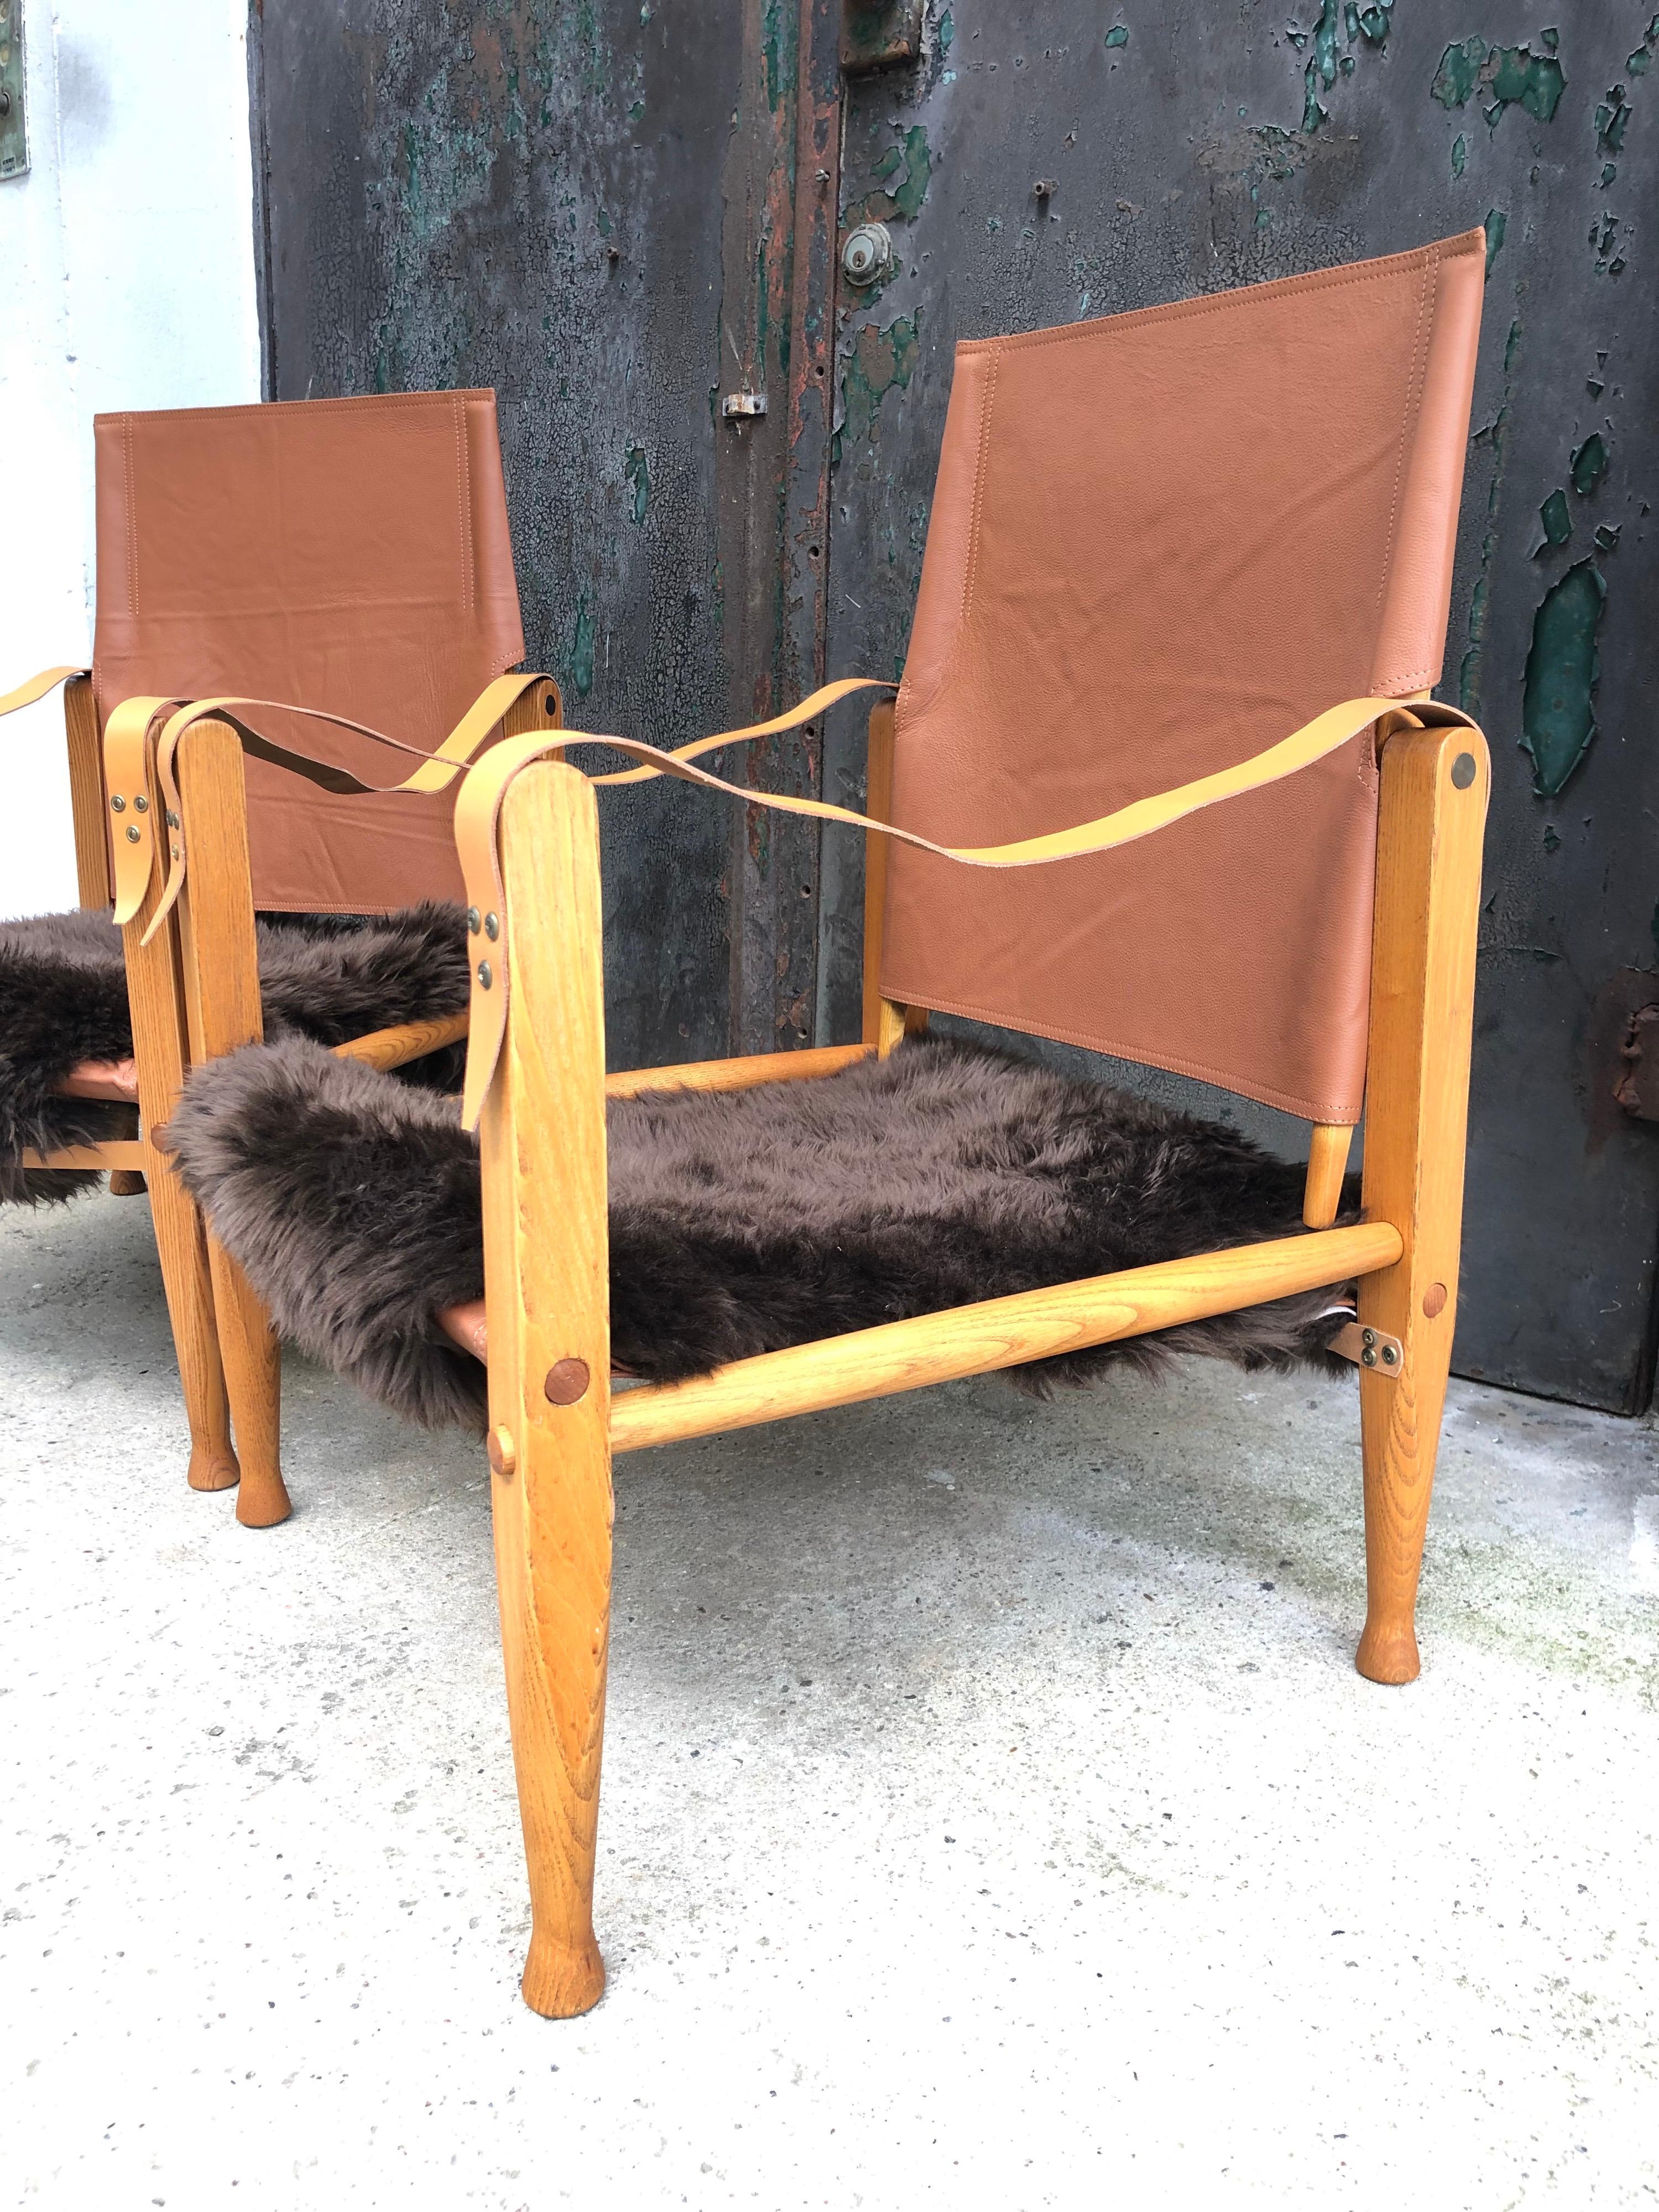 A vintage pair of refurbished Kaare Klint safari chairs from the 1960s by Rud Rasmussen furniture markers in Copenhagen.
KK47000 was designed in 1933 as a modern collapsible chair for contemporary interiors and is a design classic.
Stamped “Denmark”